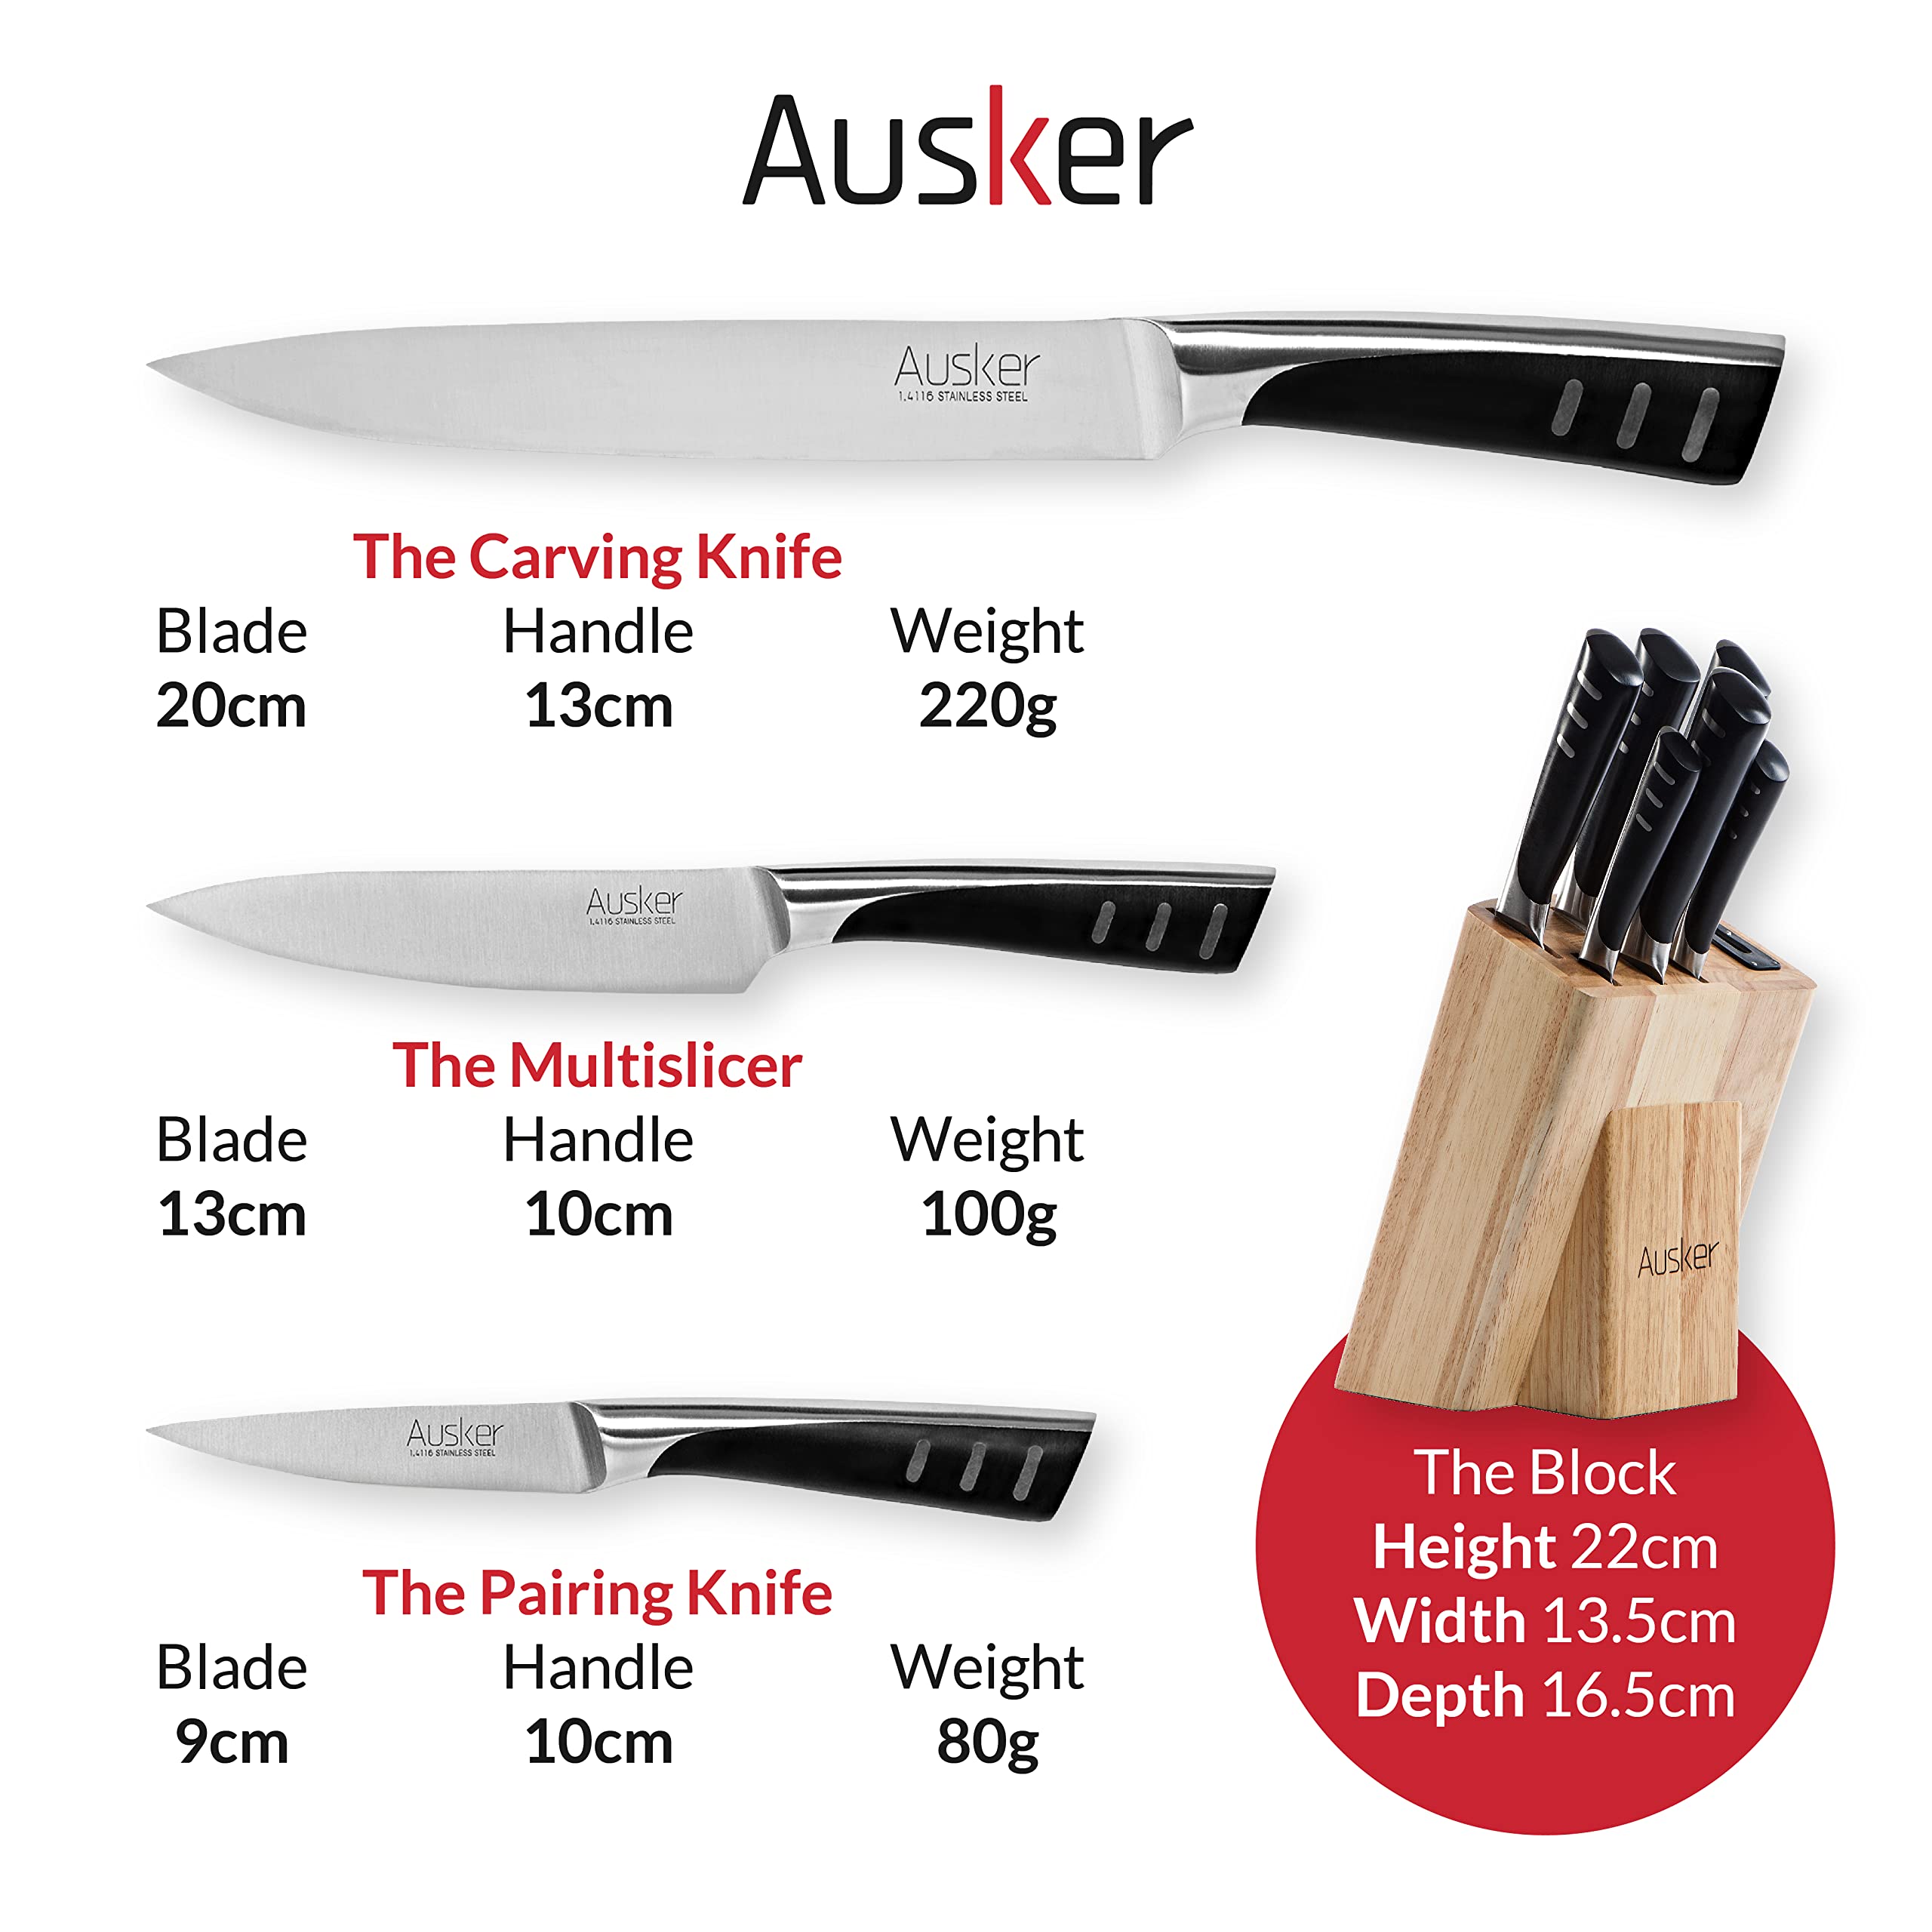 Ausker - Kitchen Knife Set Block with Sharpener, Chef, Santoku, Paring, Utility, Carving and Bread Knives, Stainless Steel Professional Kitchenware (Set of 6)